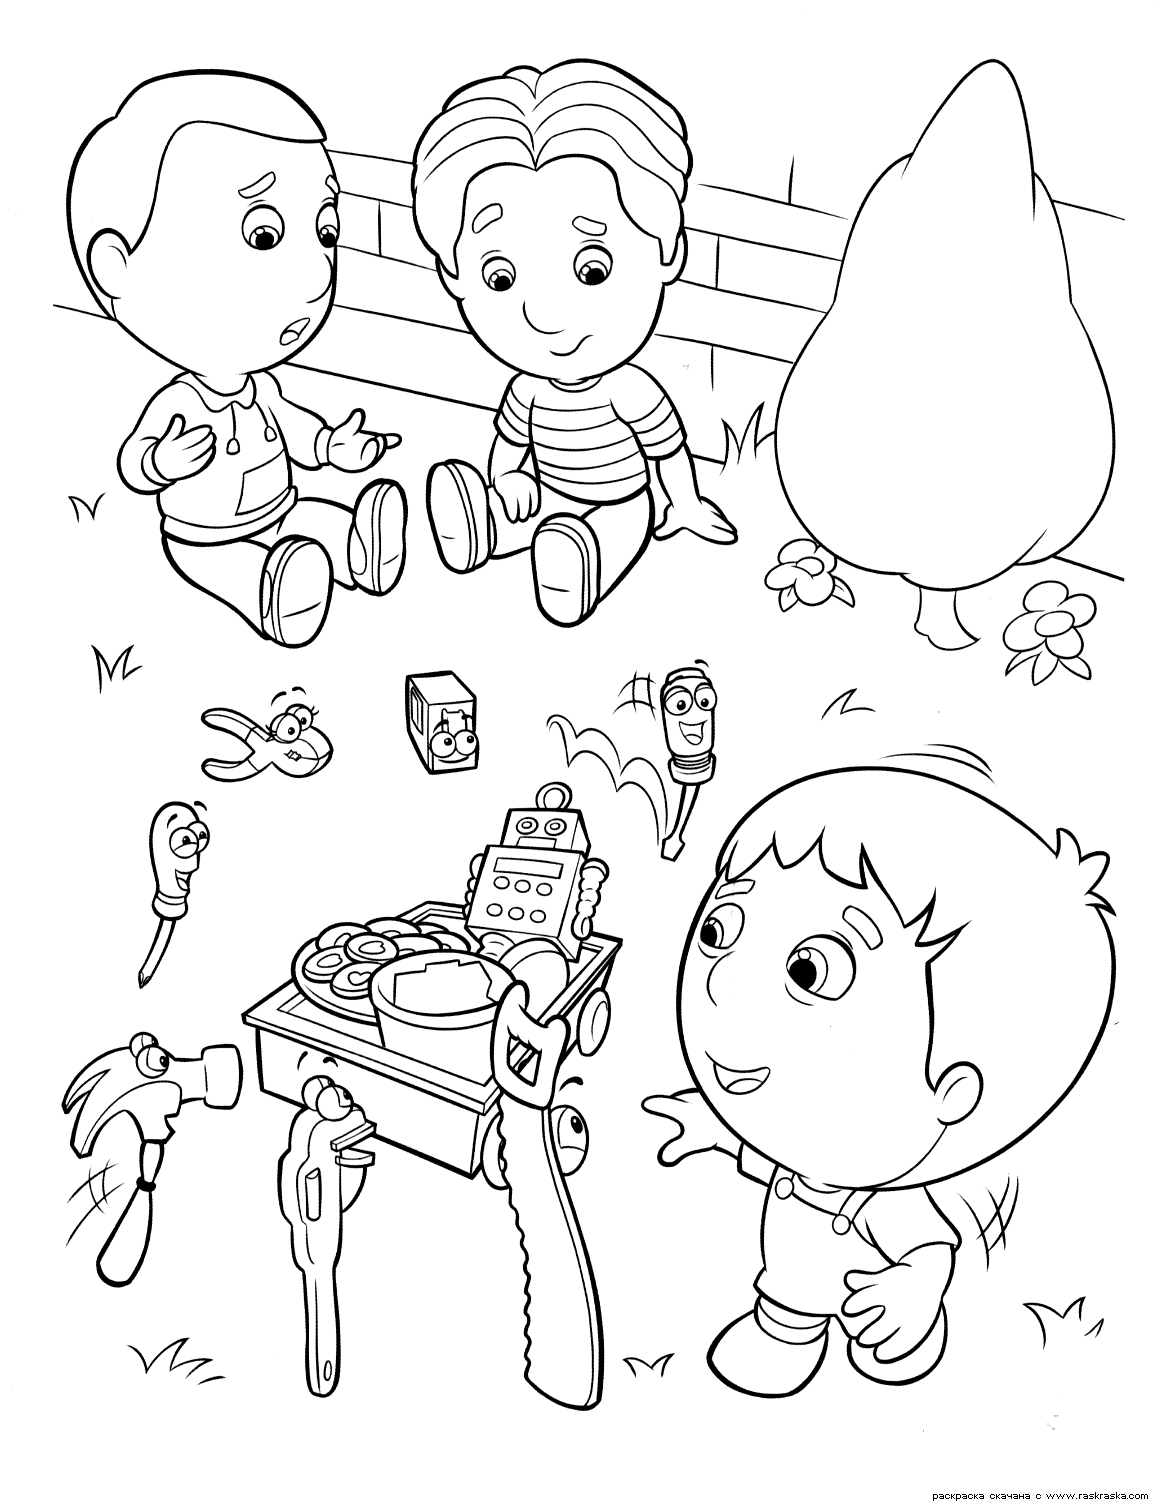 Free Handy Manny coloring page to print and color, for kids